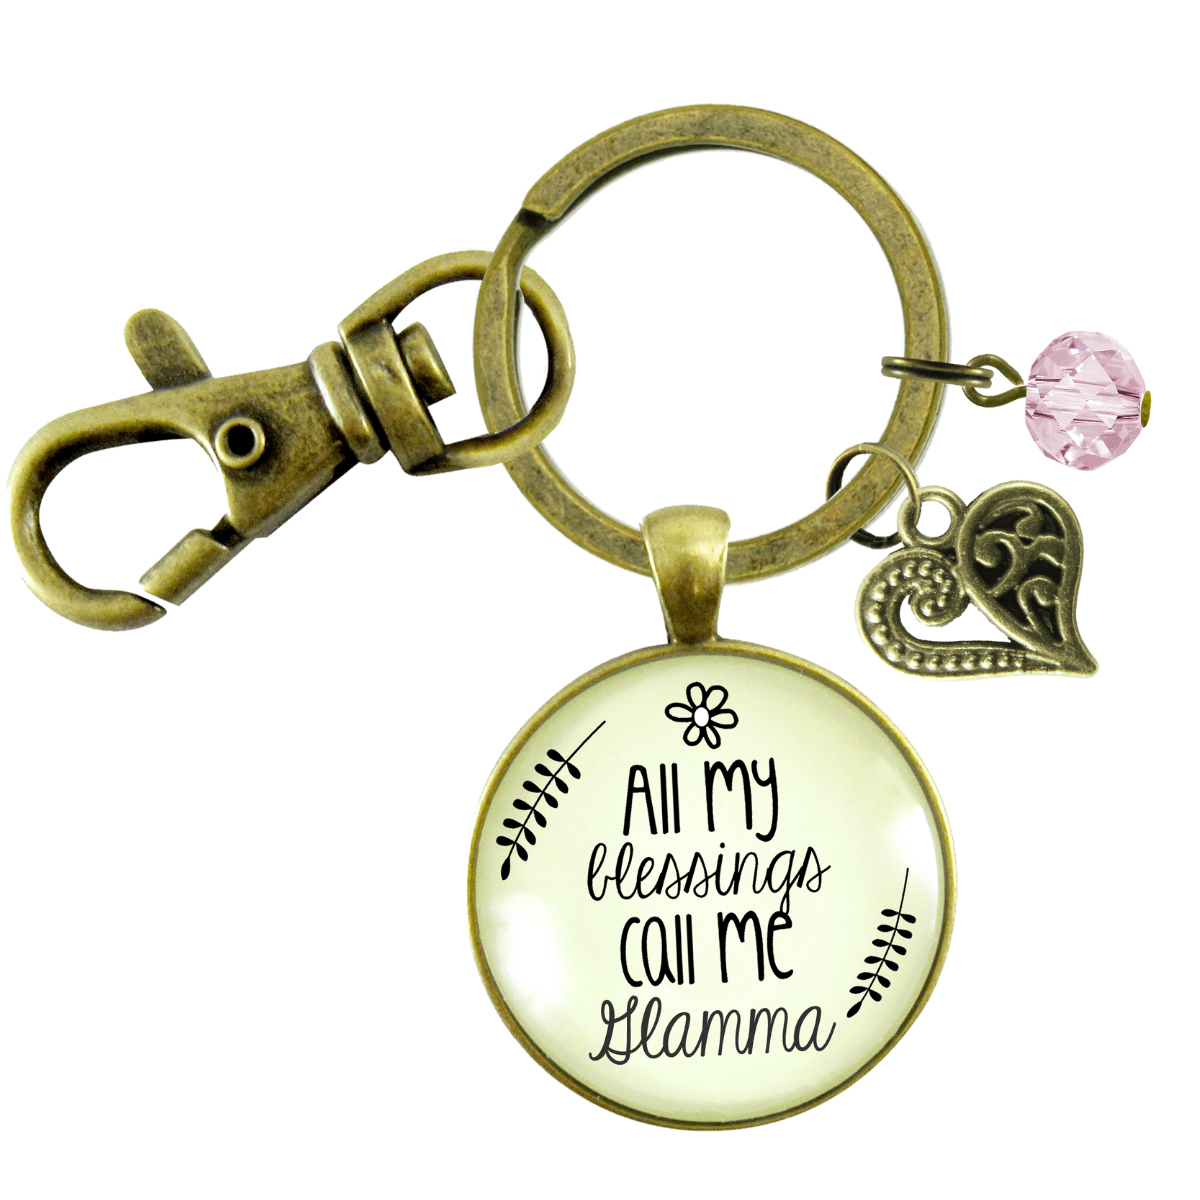 Glamma Keychain All My Blessings Young At Heart Grandma Womens Family Gift Jewelry - Gutsy Goodness Handmade Jewelry;Glamma Keychain All My Blessings Young At Heart Grandma Womens Family Gift Jewelry - Gutsy Goodness Handmade Jewelry Gifts